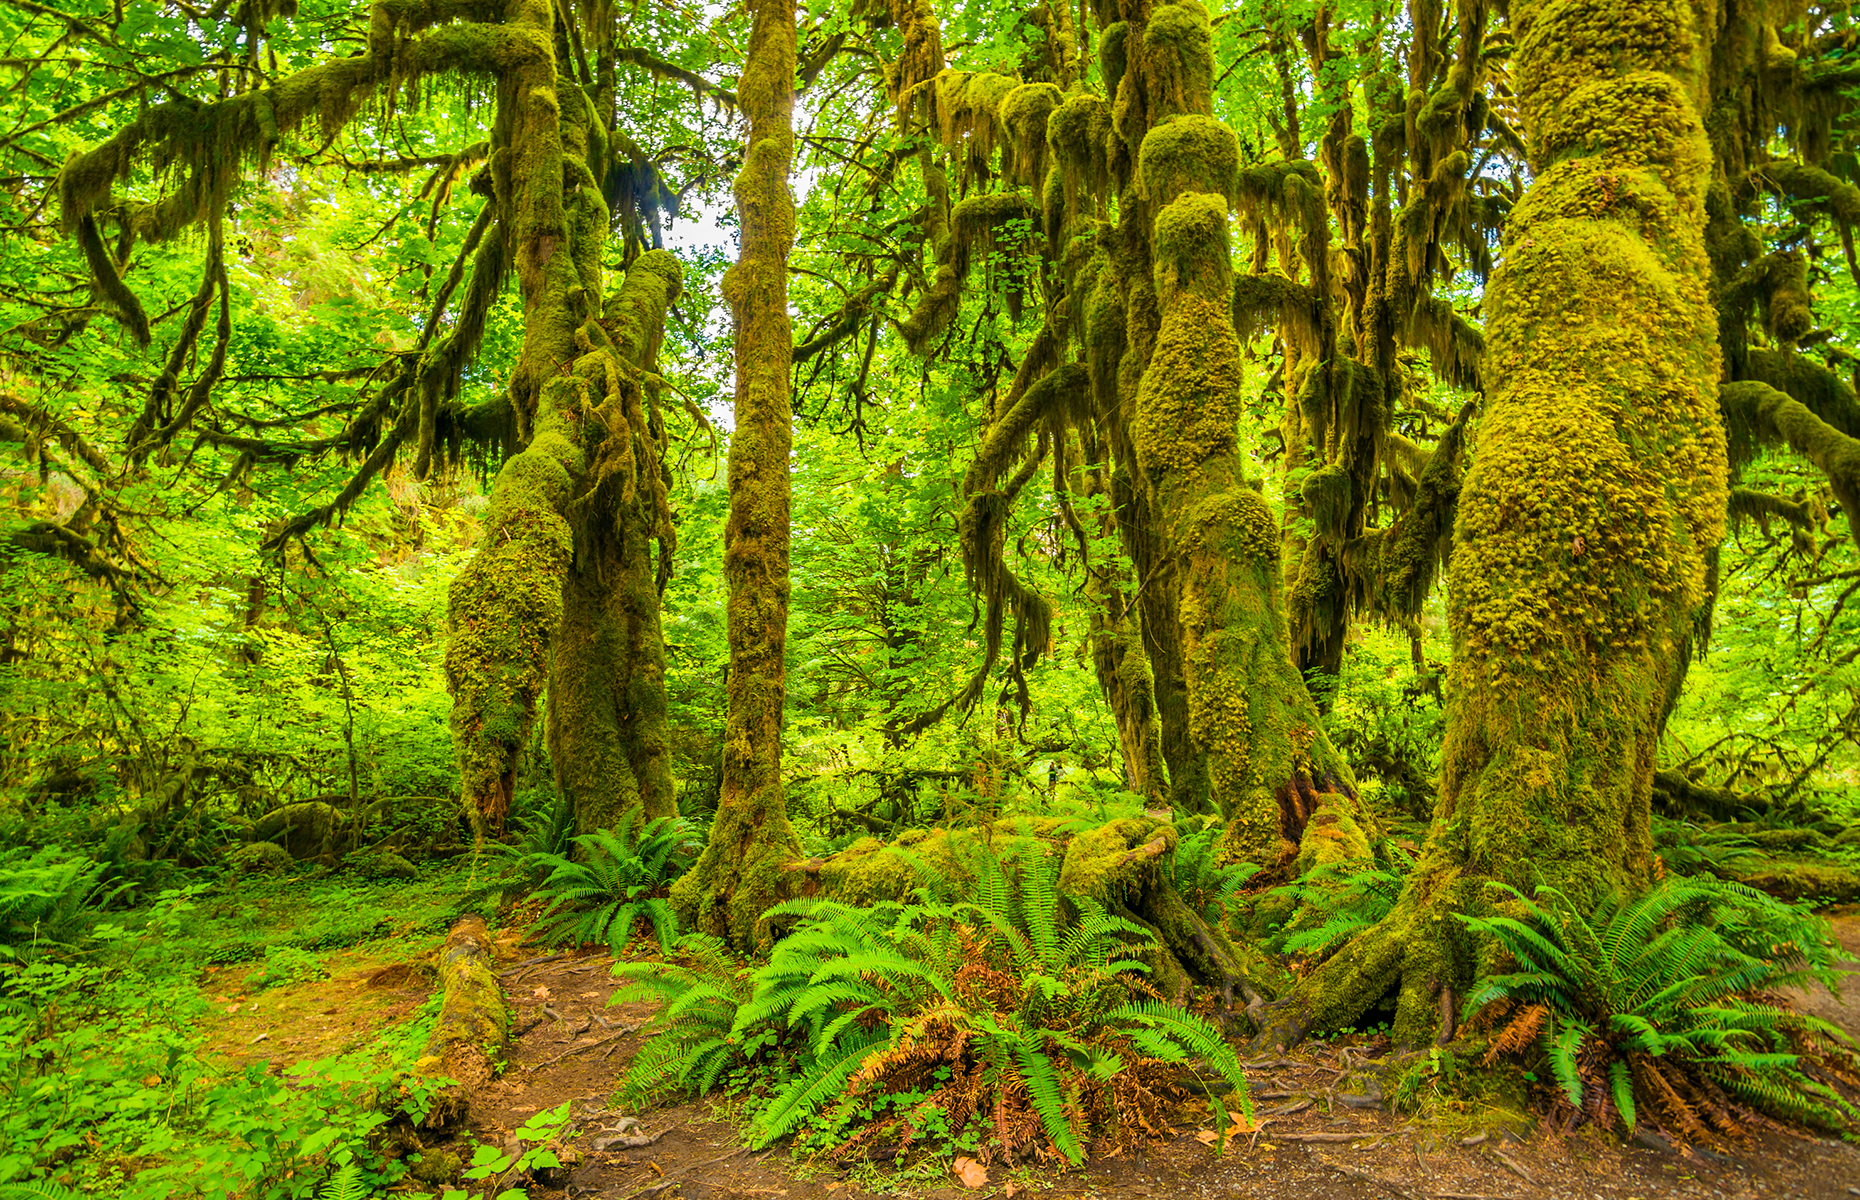 <p><a href="https://www.nps.gov/olym/planyourvisit/wilderness.htm" rel="noreferrer noopener">Olympic National Park</a> in Washington is comprised of nearly 95 percent designated wilderness lands that are off-limits to roads. It includes areas with glacial peaks, temperate rainforests, and rugged coastline.</p>